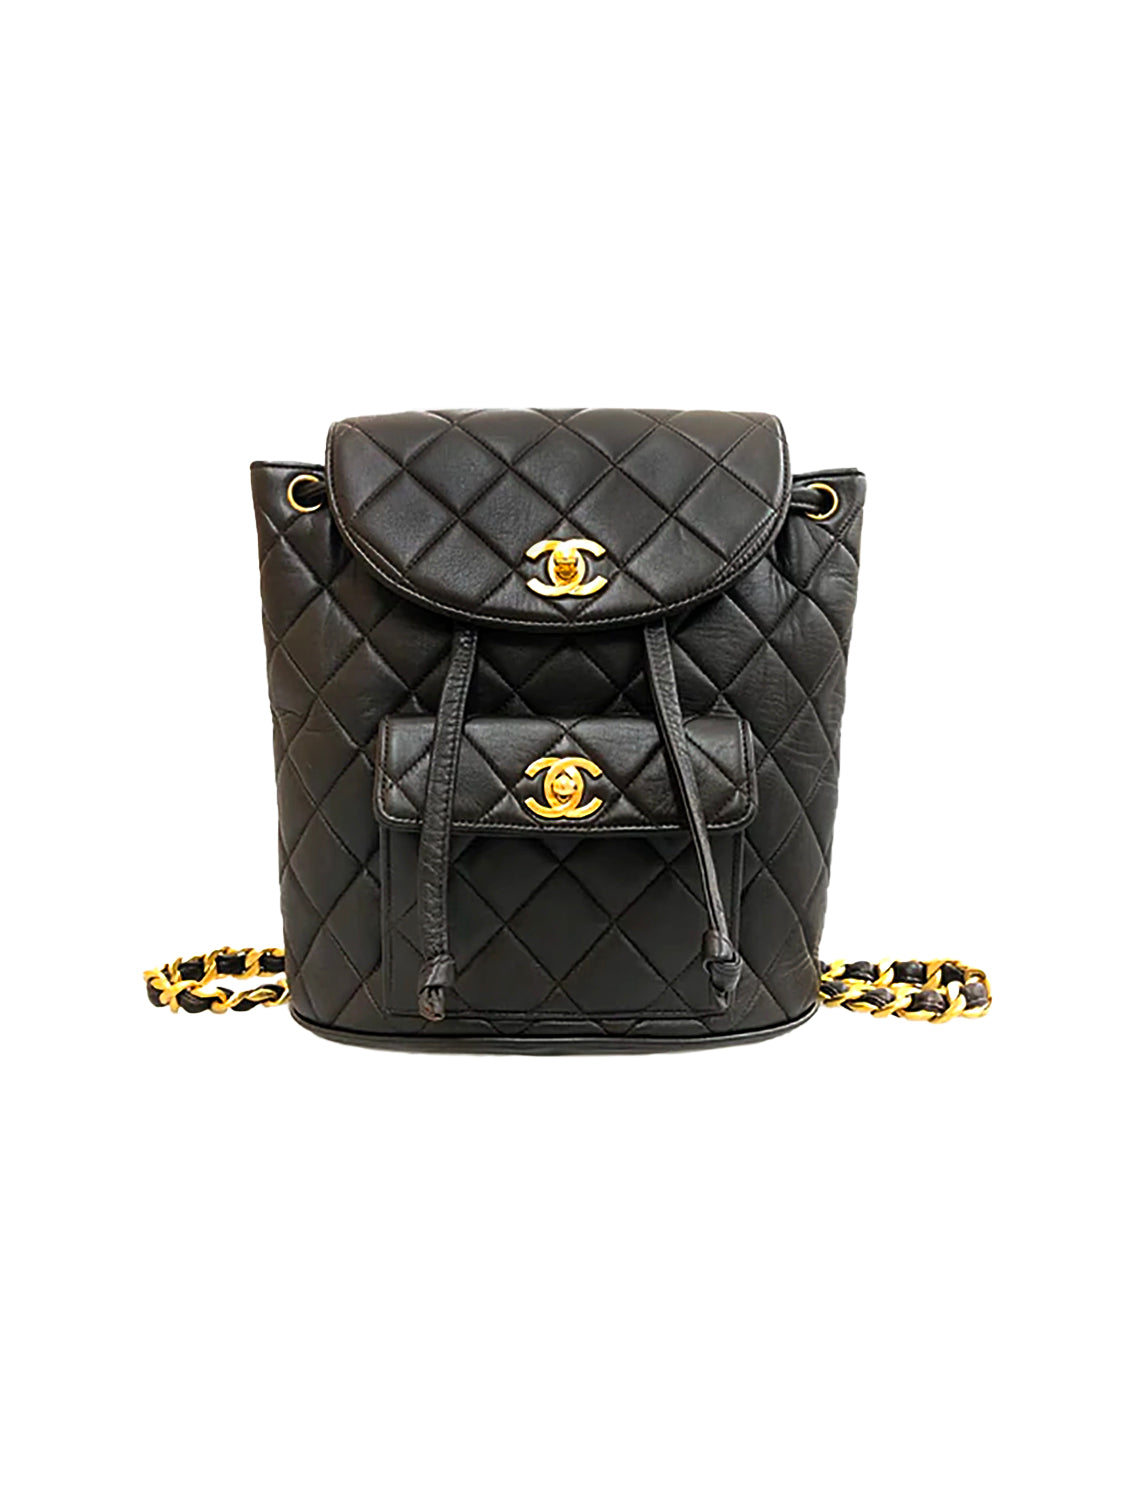 CHANEL Lambskin Quilted CC Backpack Black 1205803